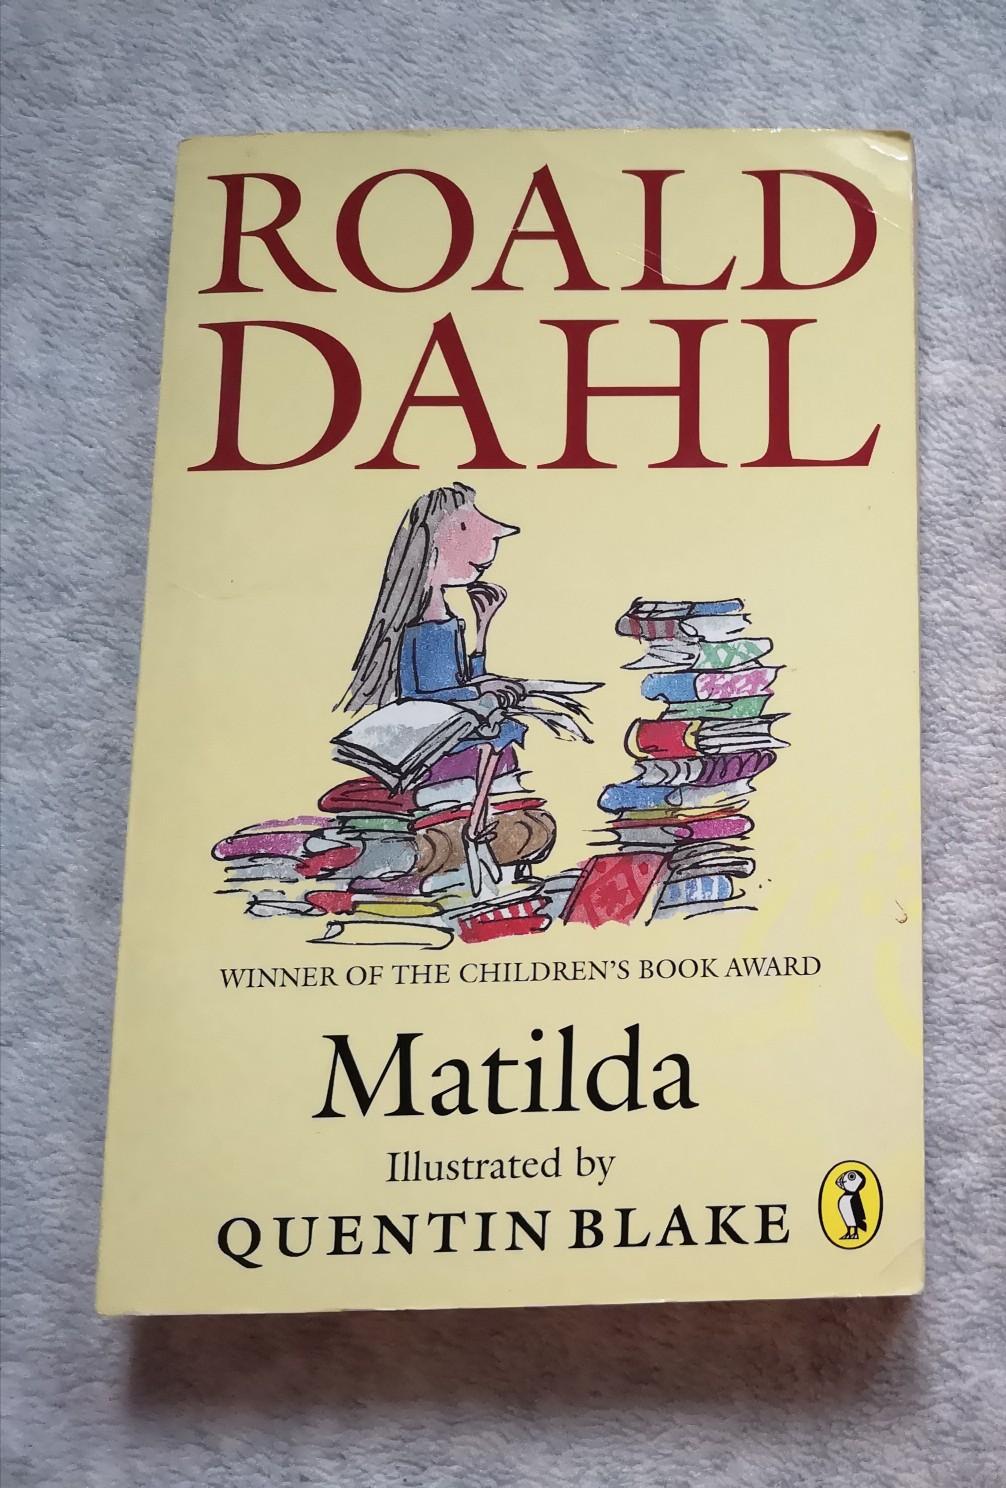 Matilda by Ronald Dahl (Children's Book) in DY5 Dudley for £0.50 for